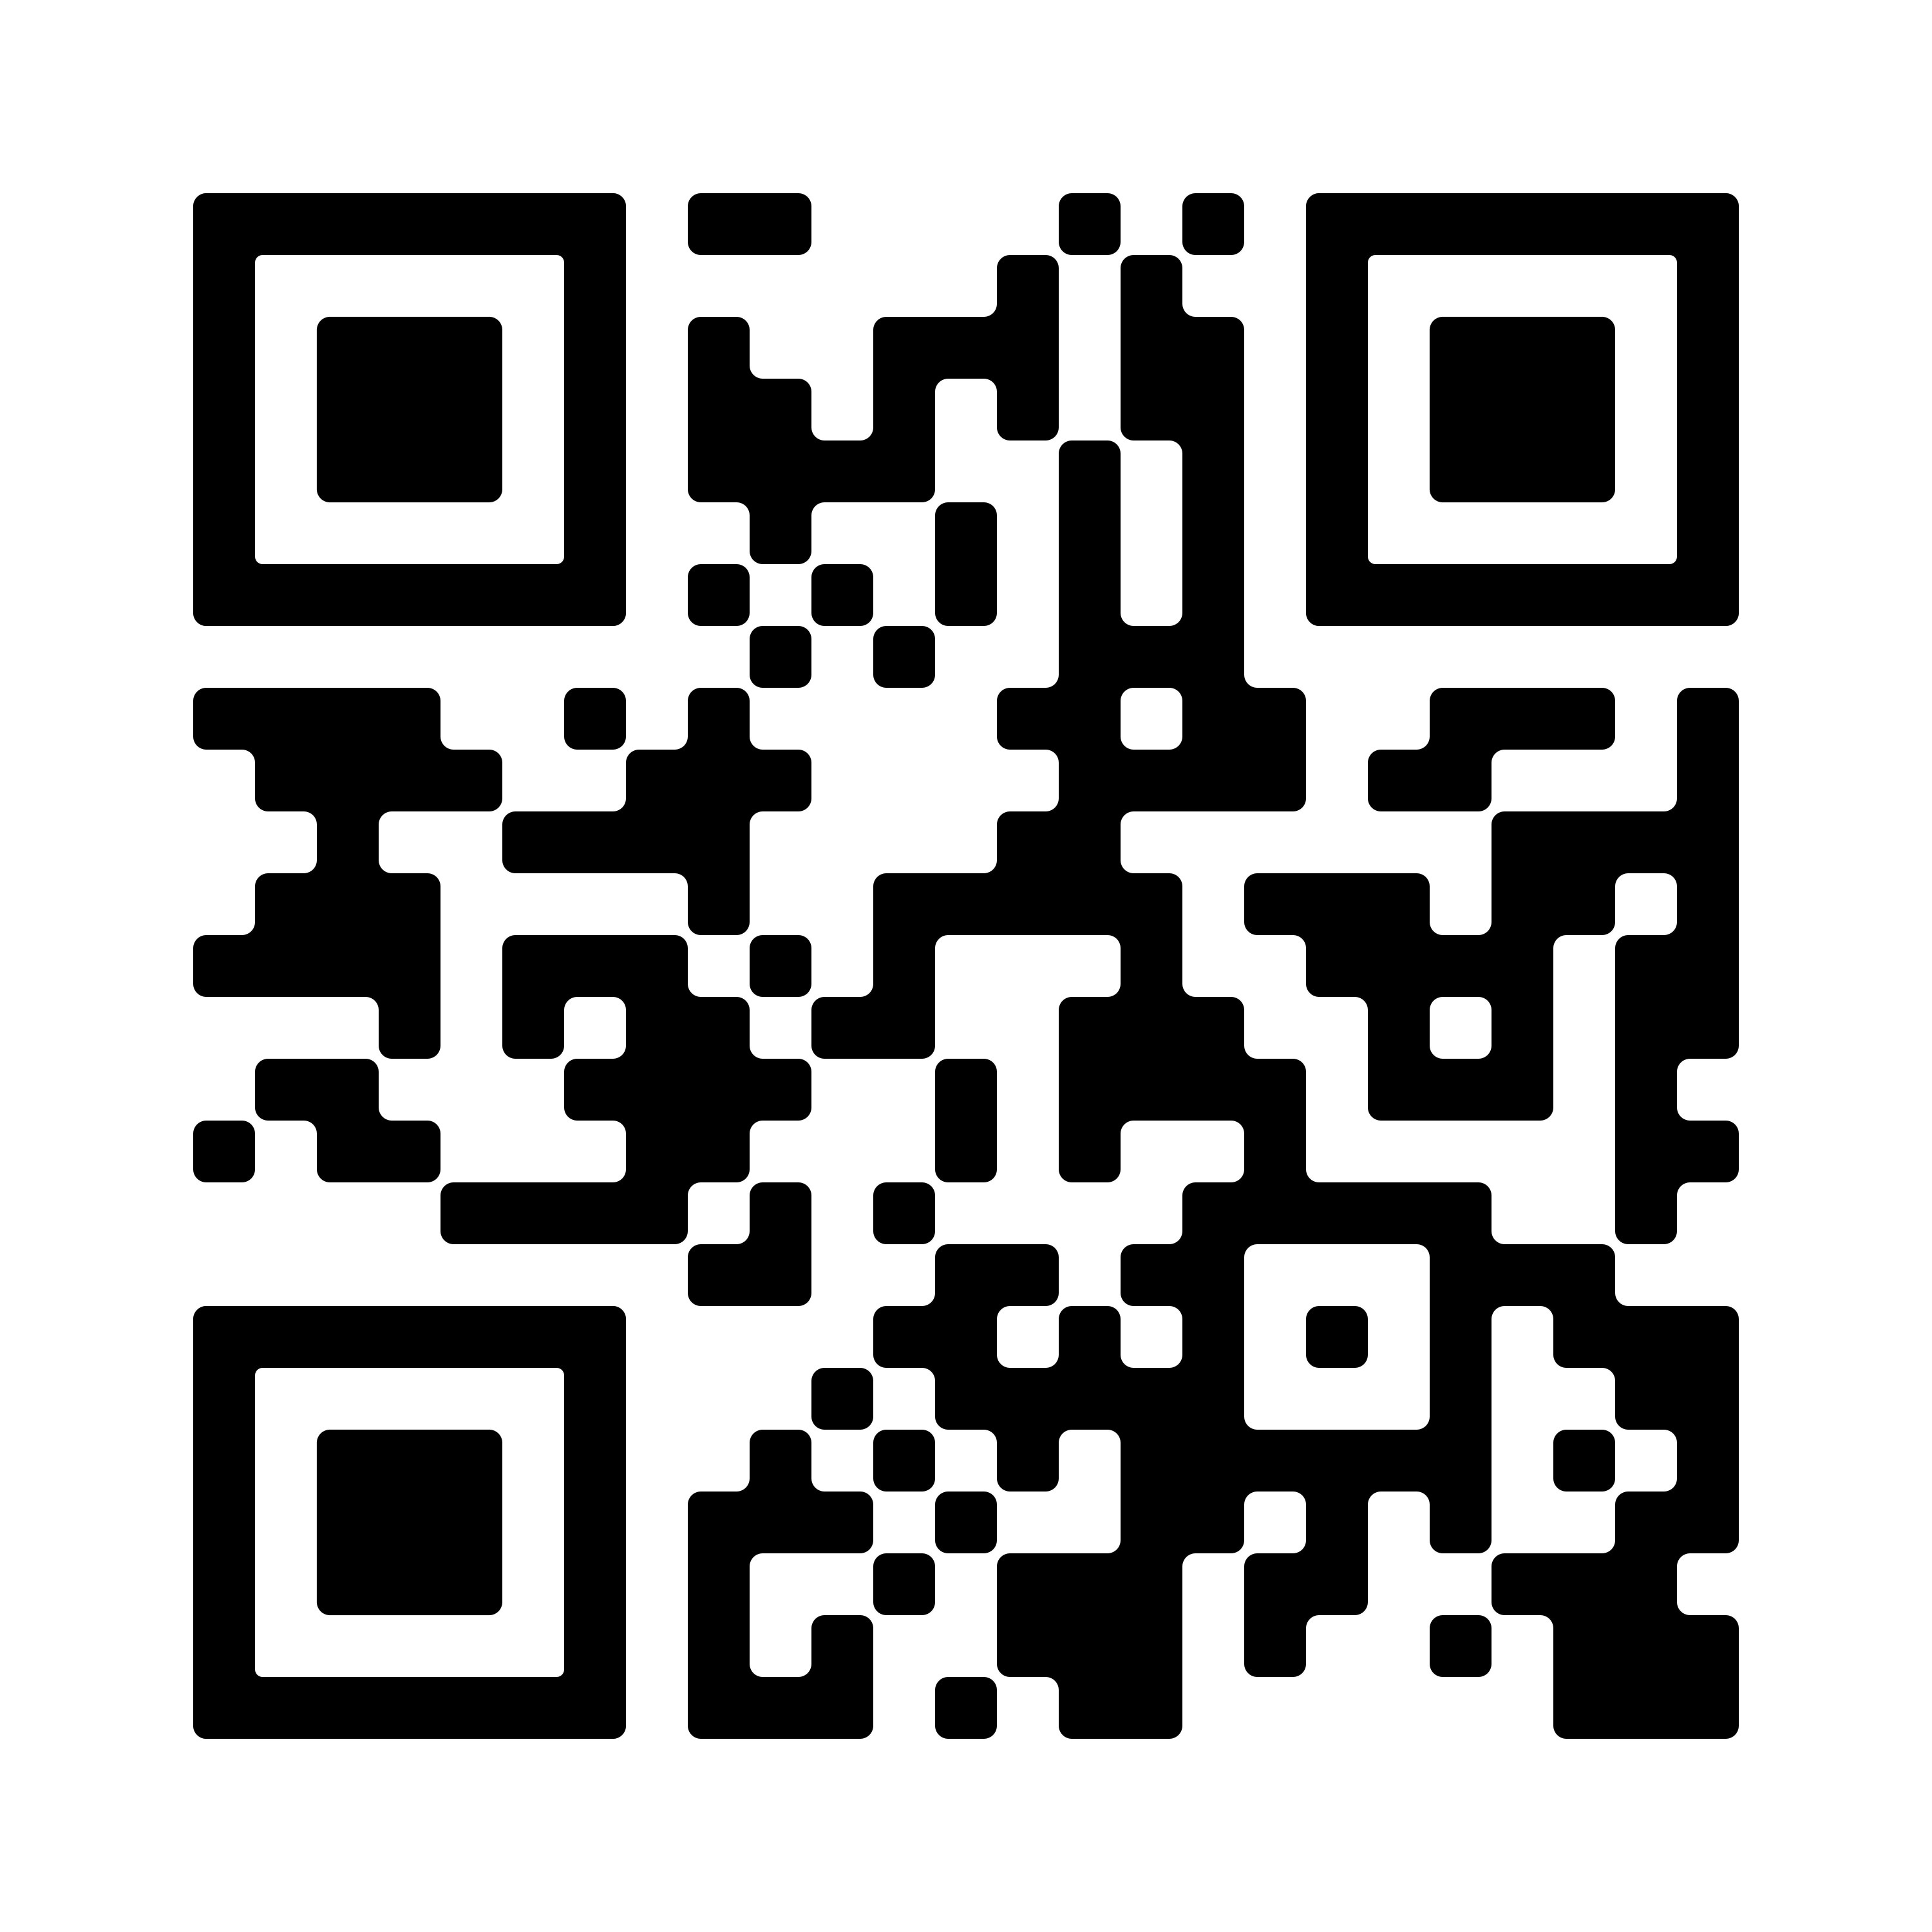 A QR code for the beanstack challenge